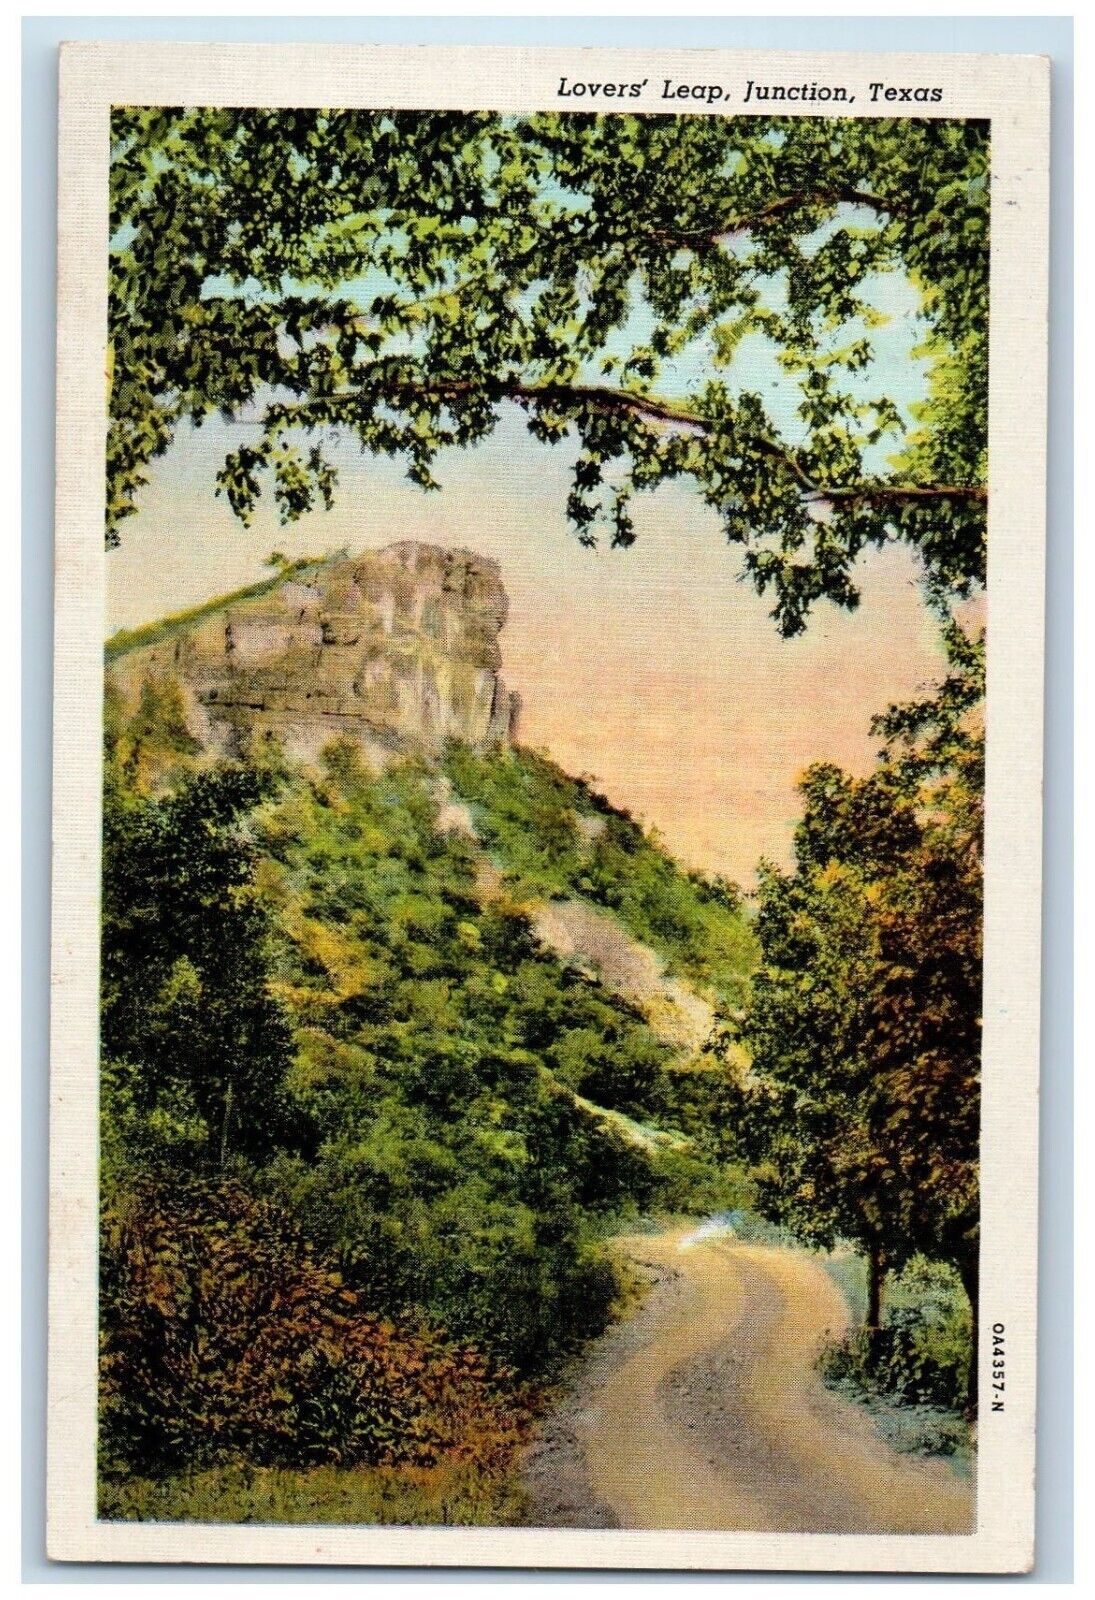 1940 Scenic View Lovers Leap Overlooking Road Junction Texas TX Vintage Postcard